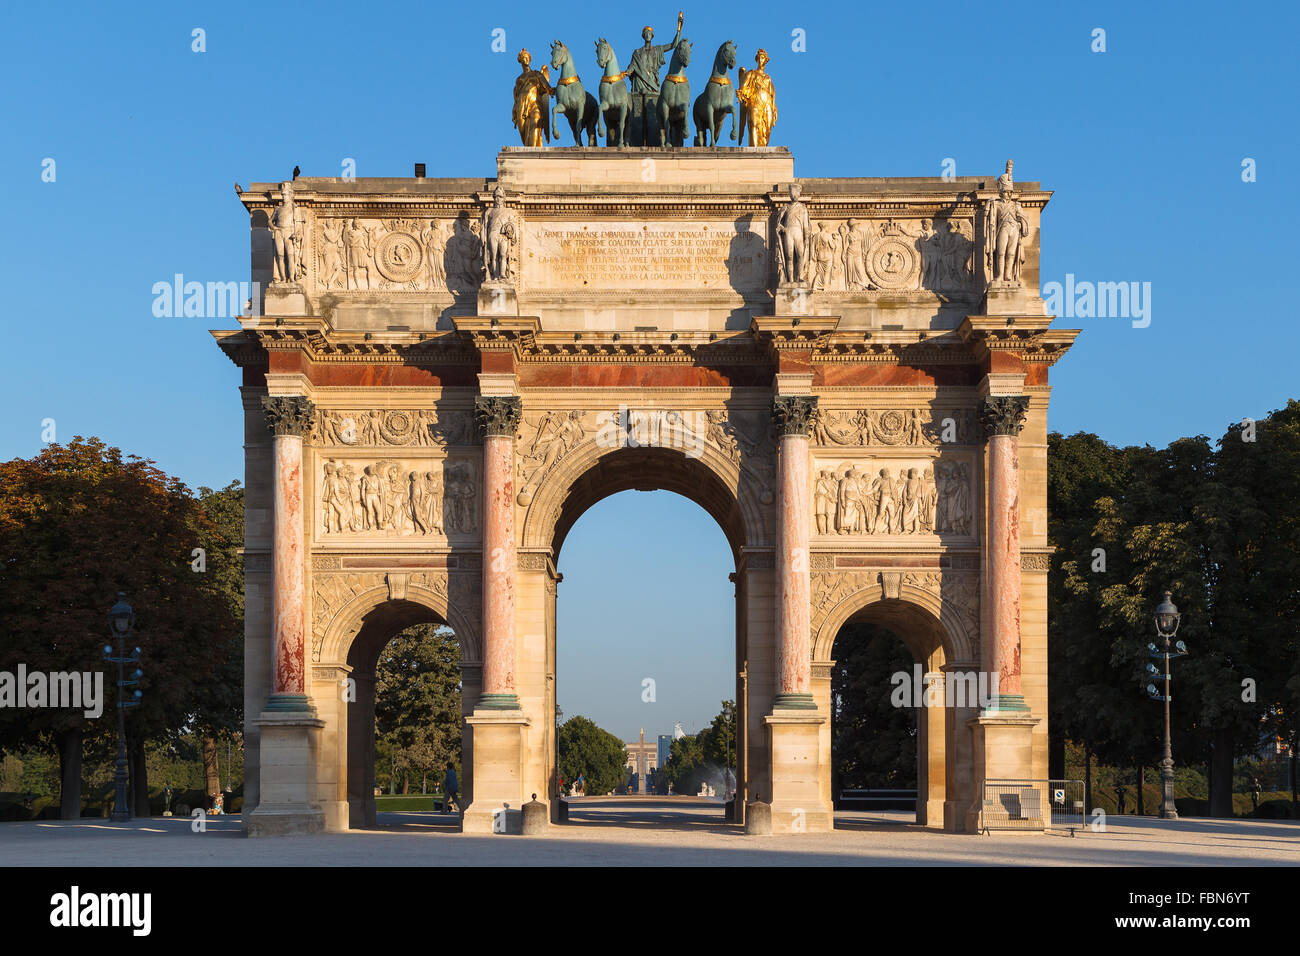 Arc de Triomphe du Carrousel early in the morning under a clear blue sky, Paris, France. Stock Photo